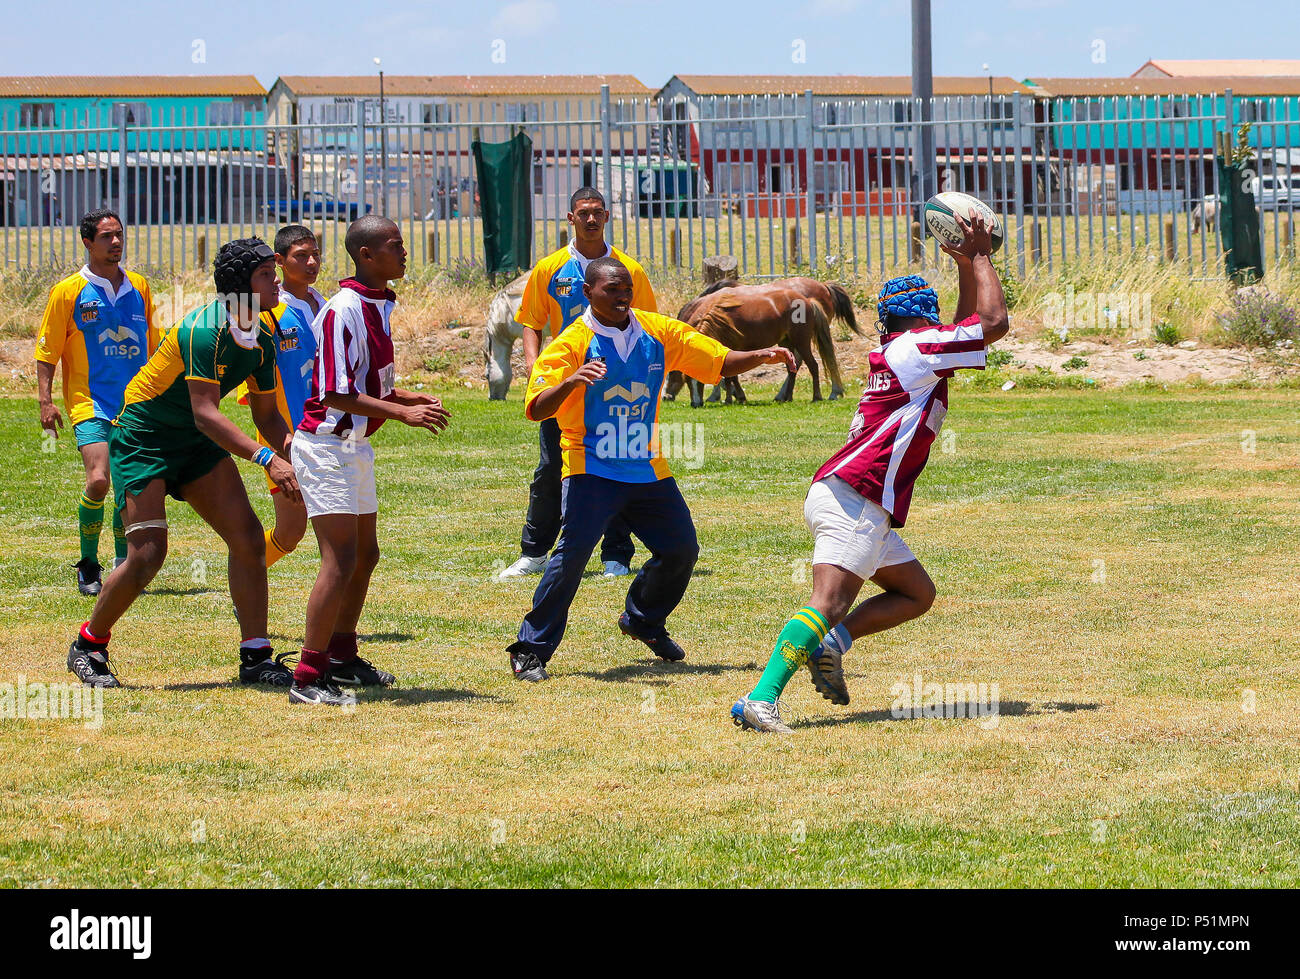 Cape Town, South Africa, December 06, 2011, Diverse children playing Rugby at school Stock Photo